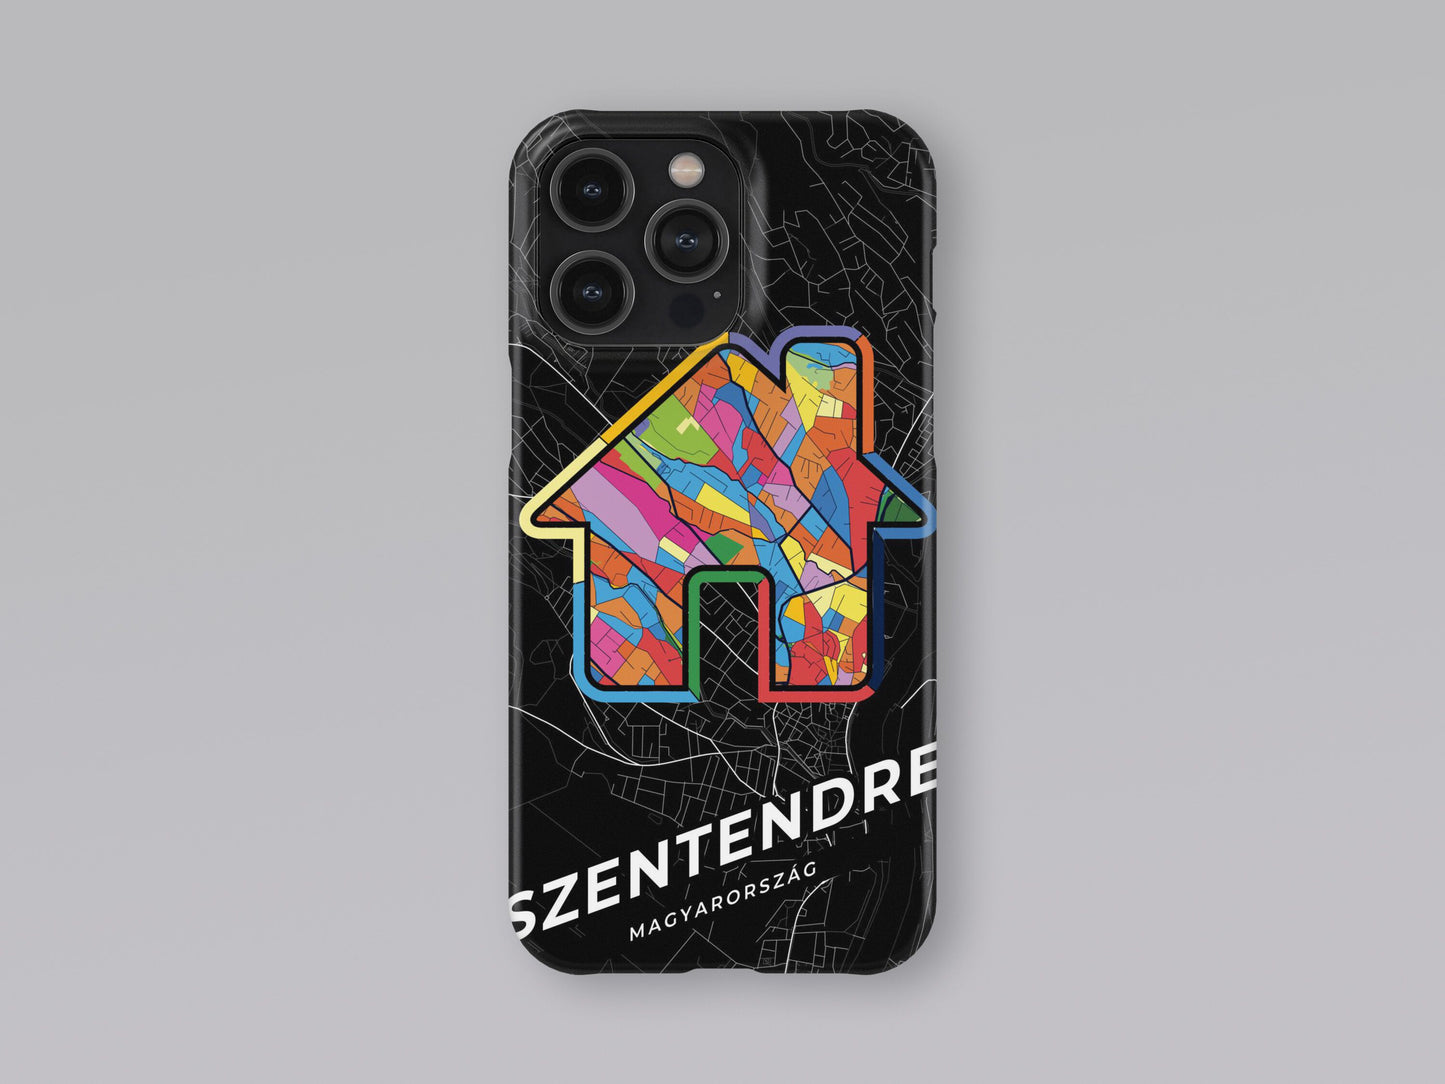 Szentendre Hungary slim phone case with colorful icon 3